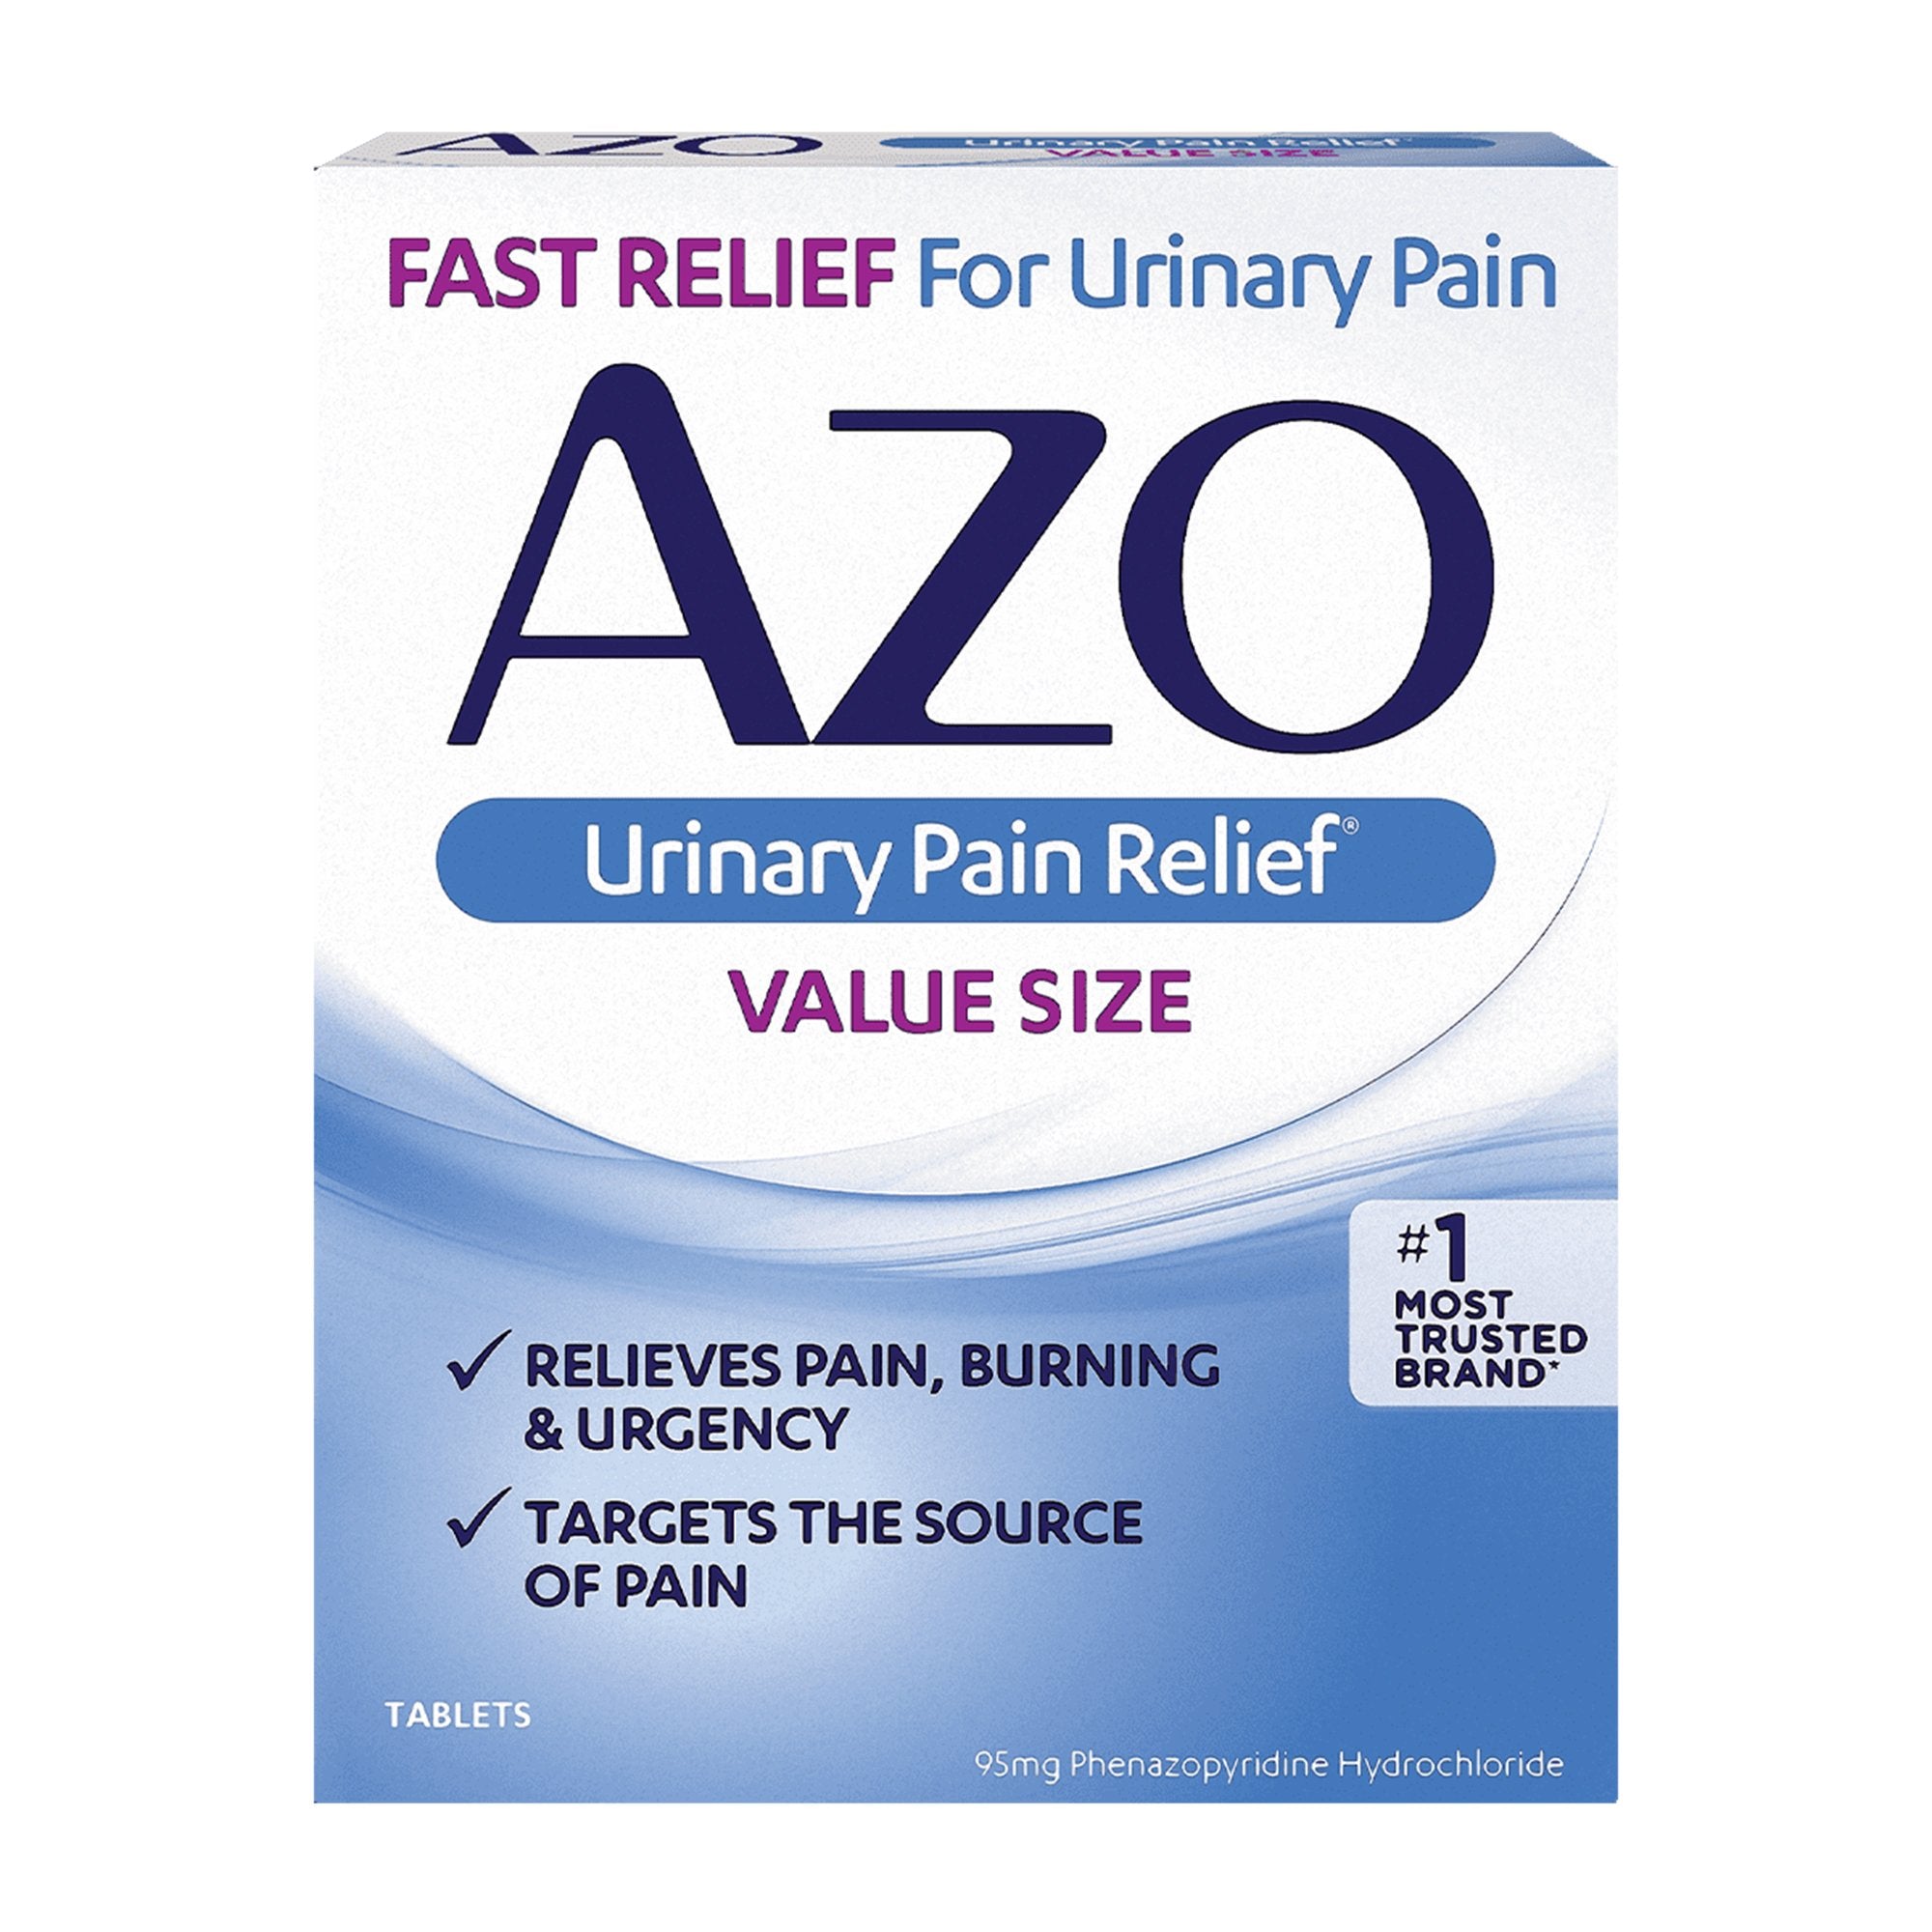 Urinary Pain Relief AZO® 95 mg Strength Phenazopyridine HCL Tablet 30 per Bottle